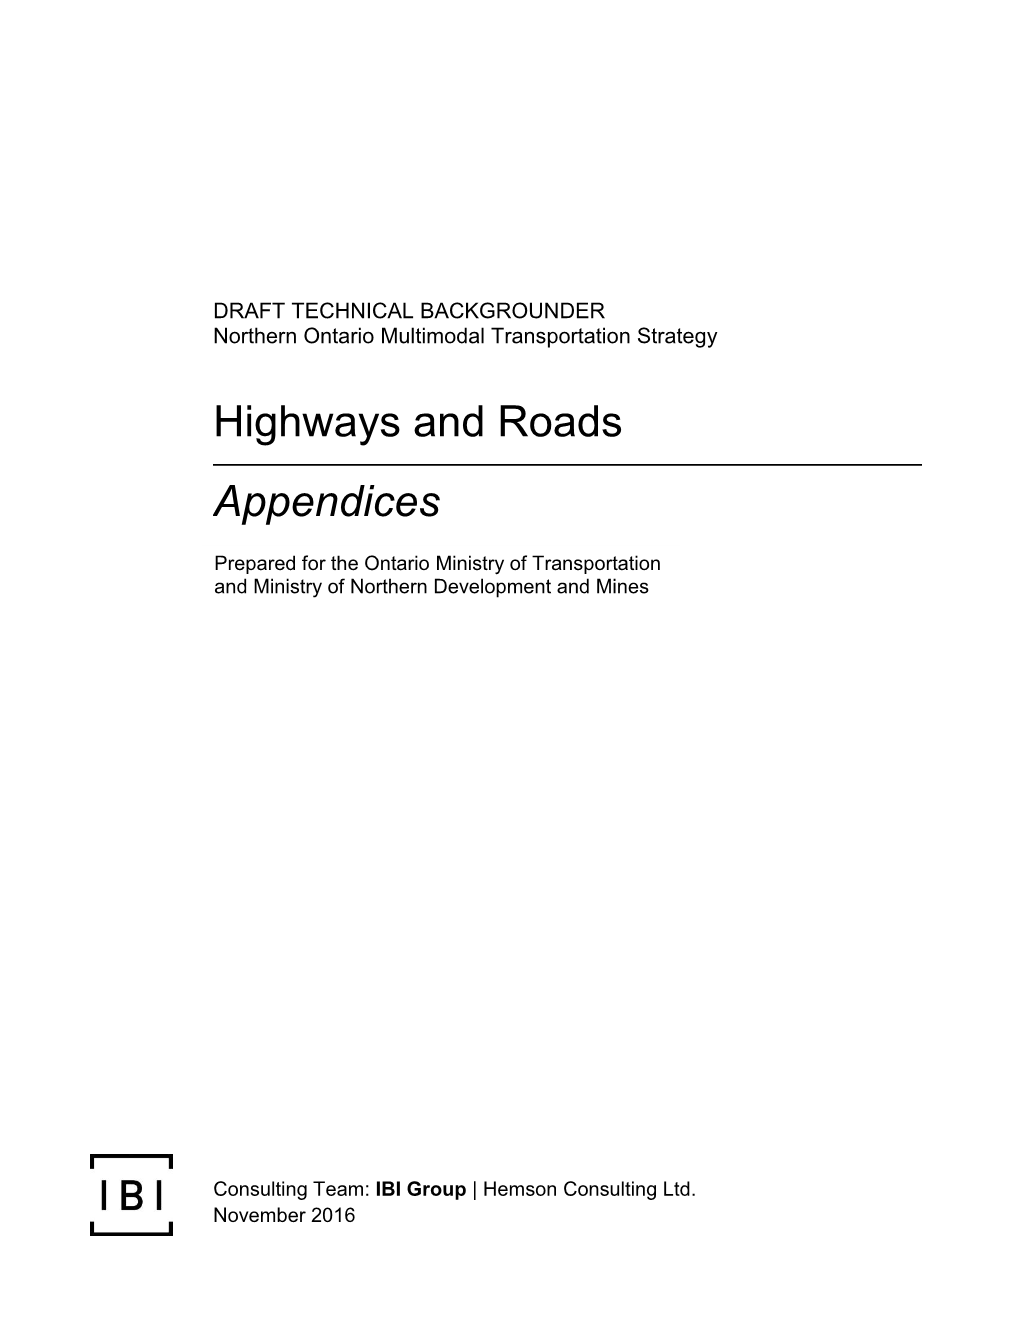 Highways and Roads Draft Technical Backgrounder Appendices